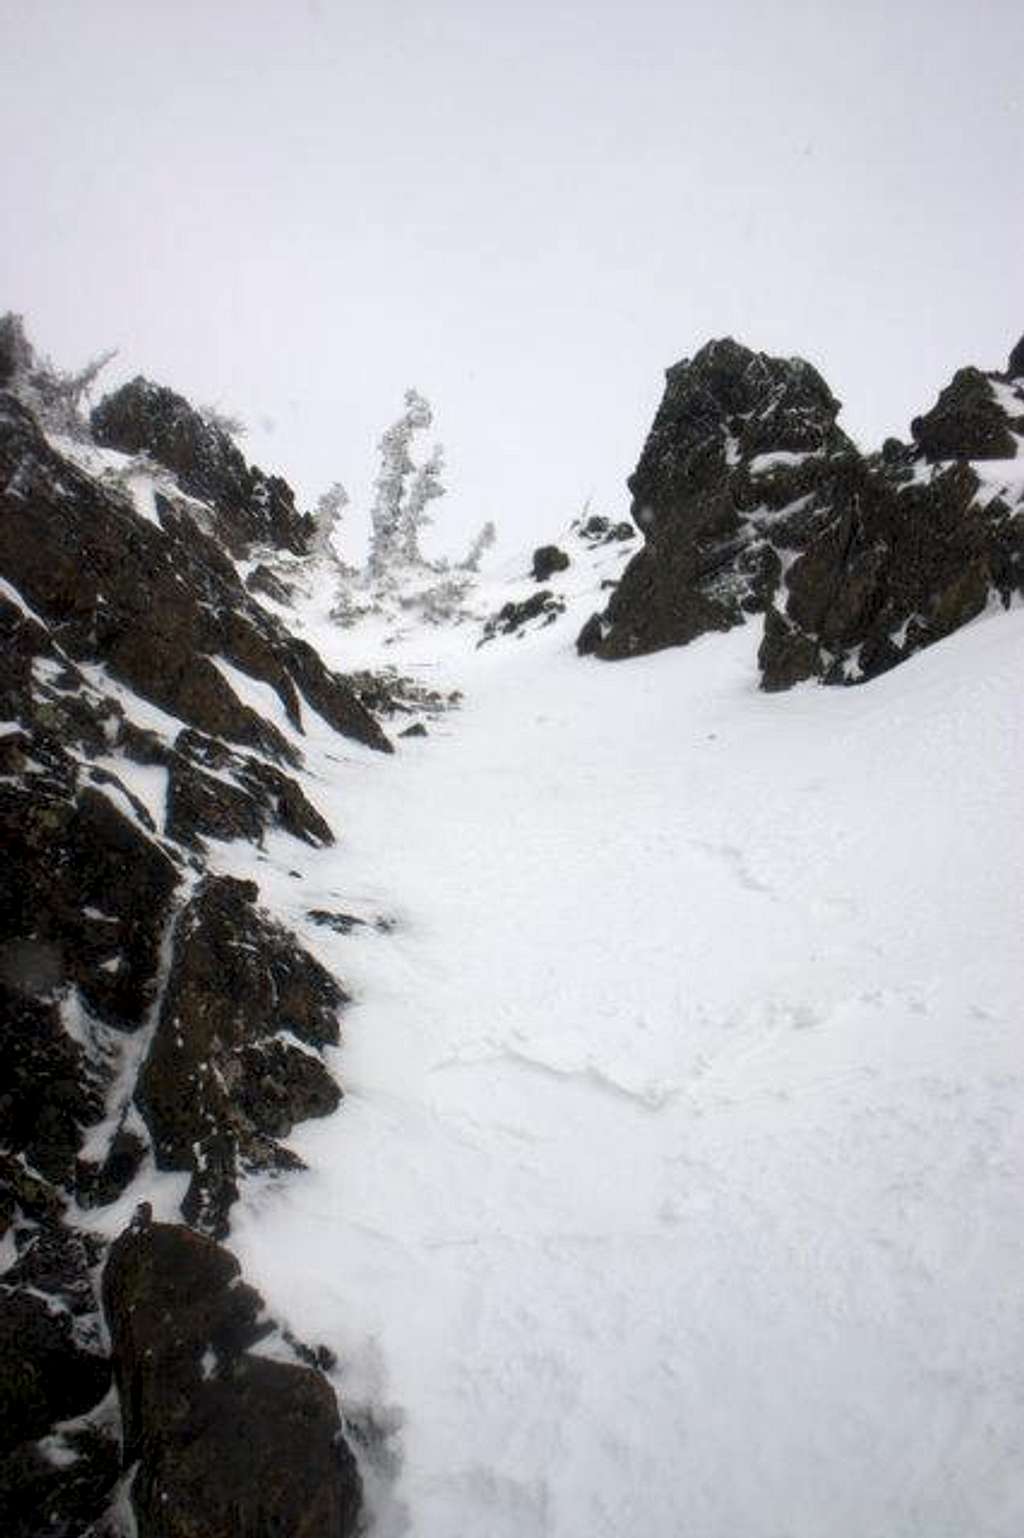 Chute after west face traverse